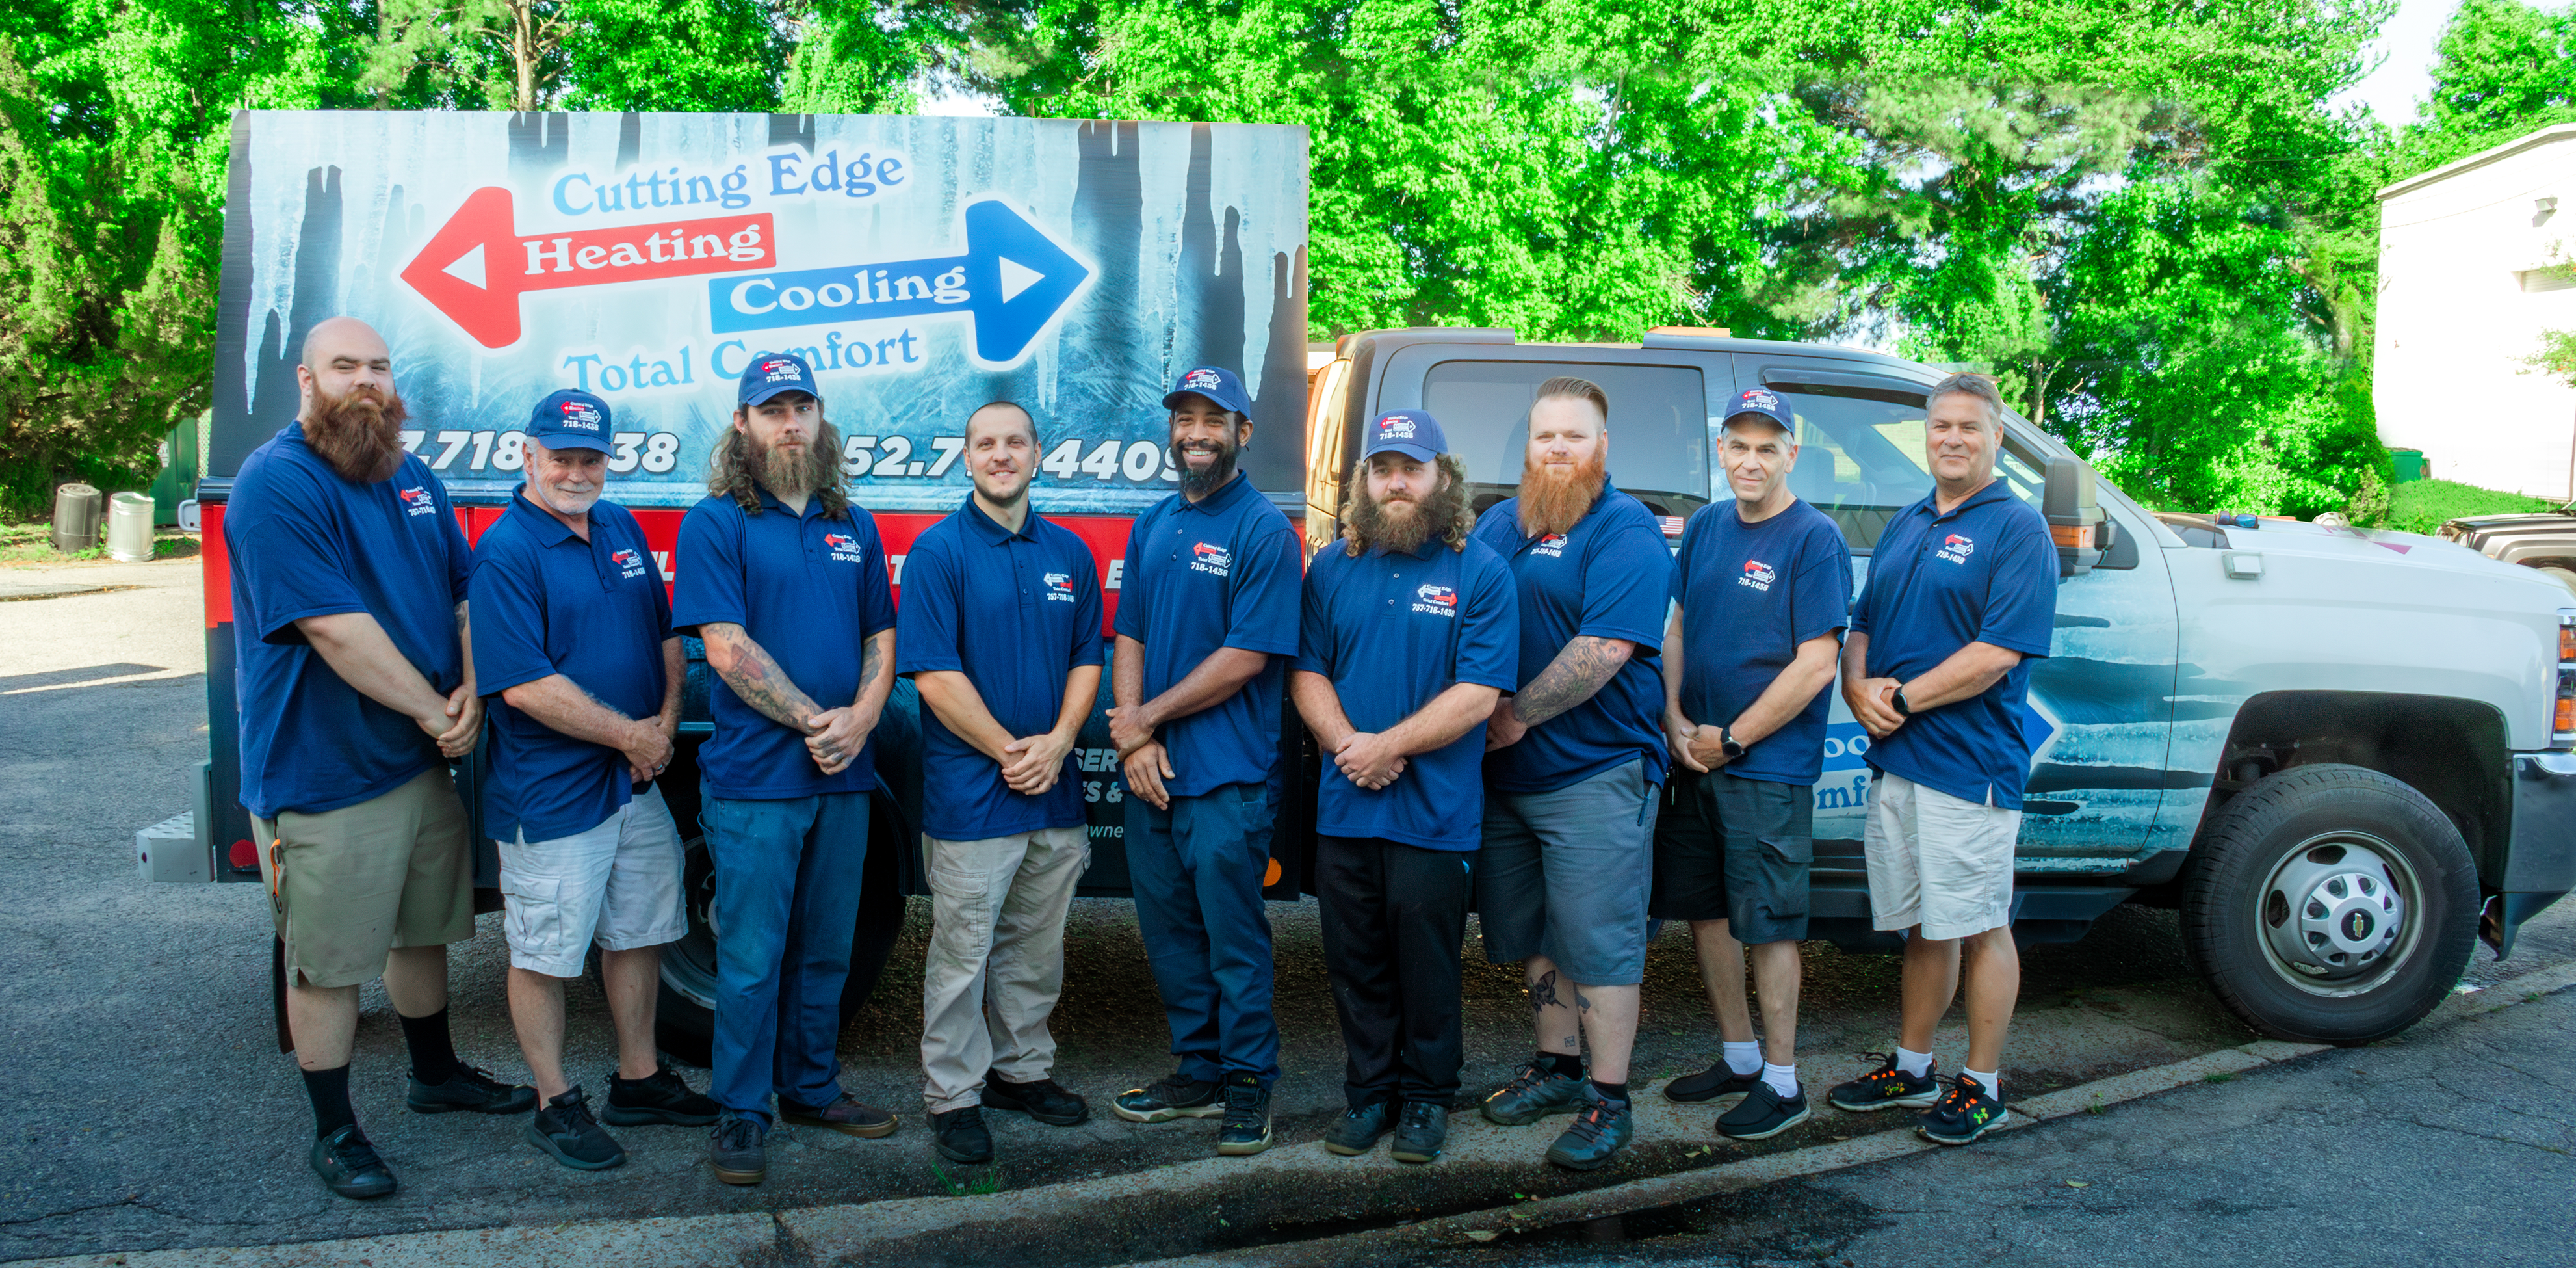 air conditioning services team